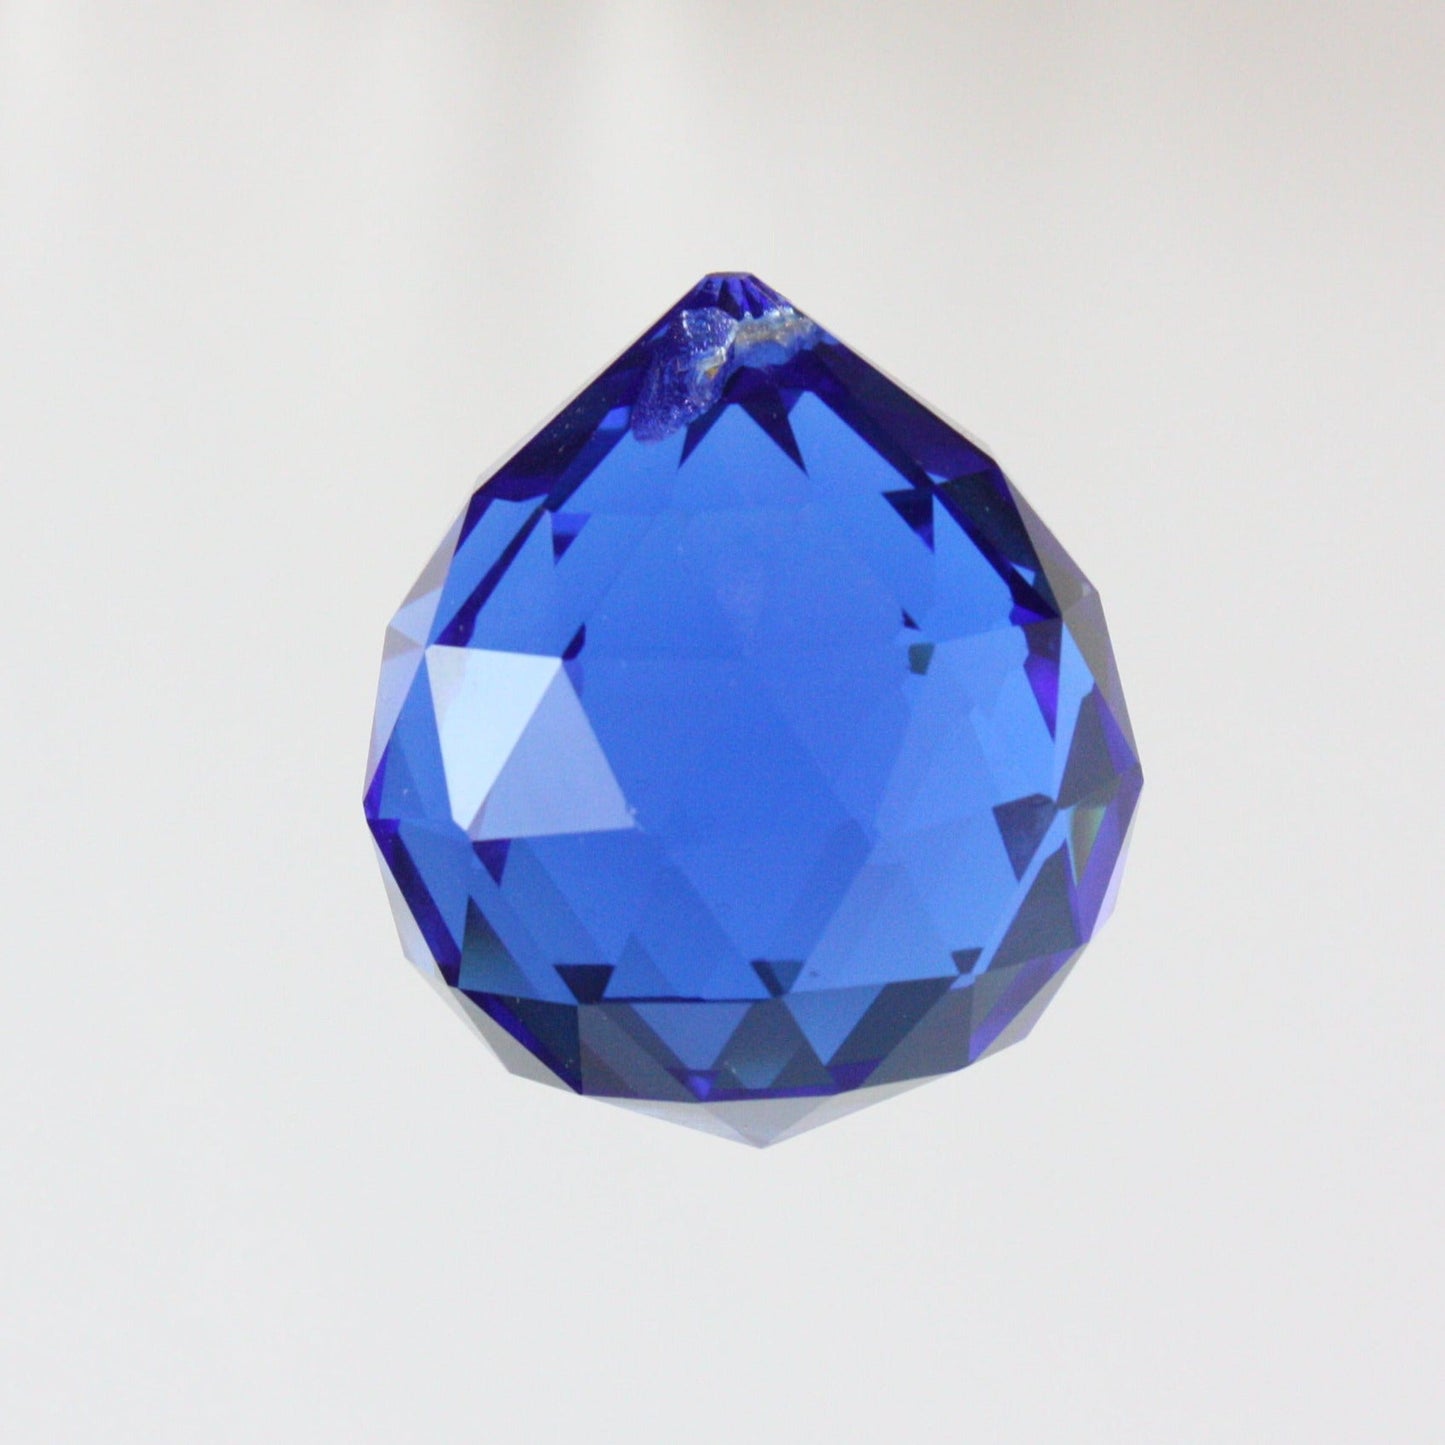 40mm Colored Faceted Ball